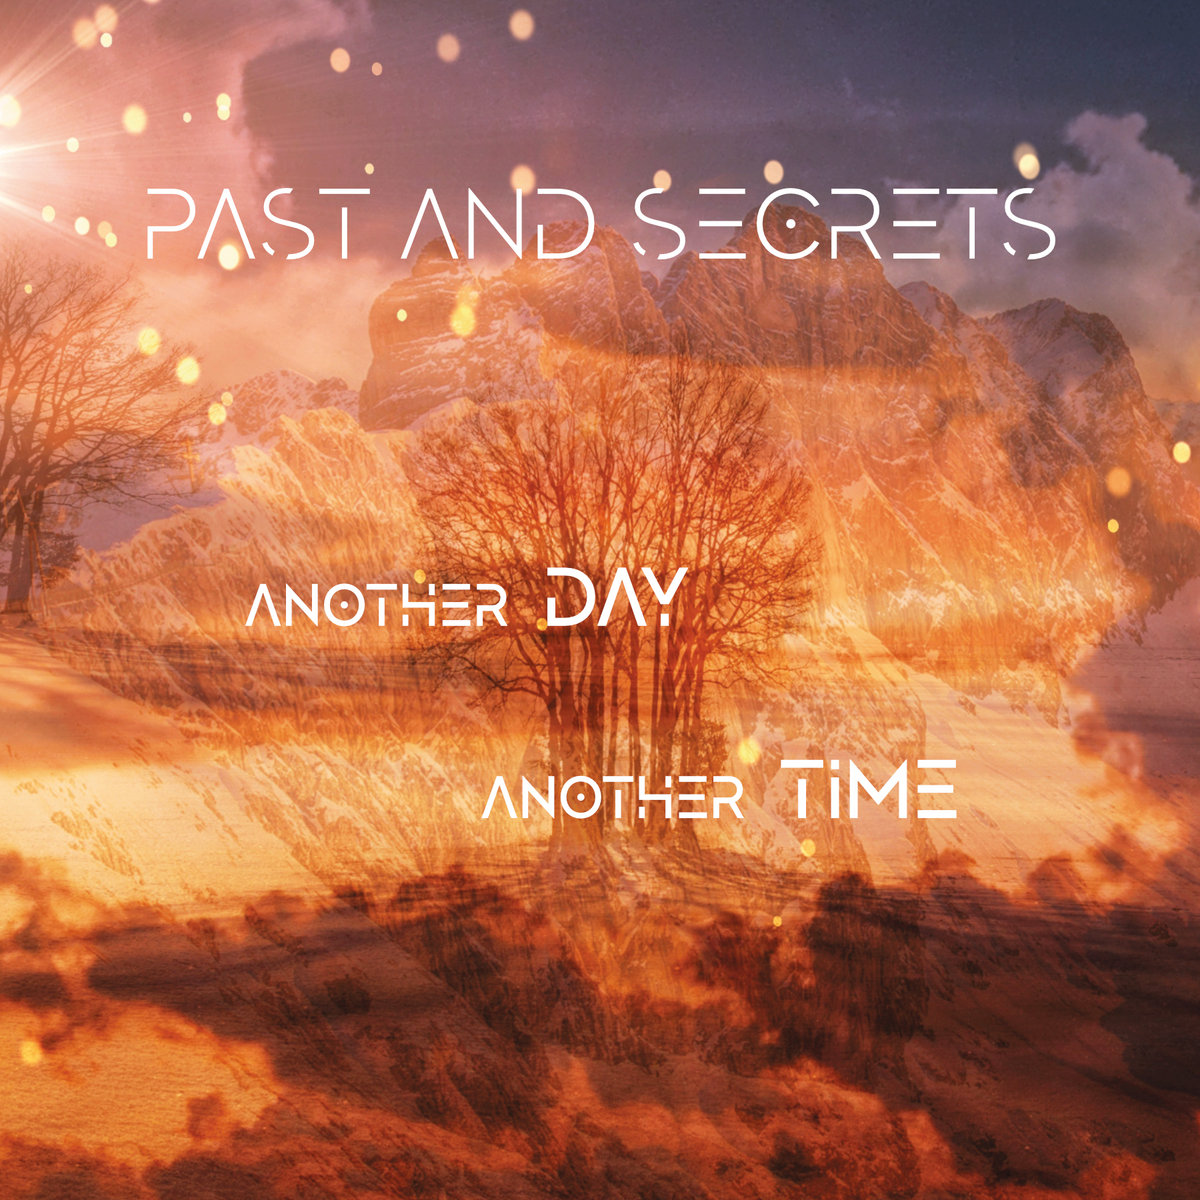 Past and Secrets: Another Day, Another Time